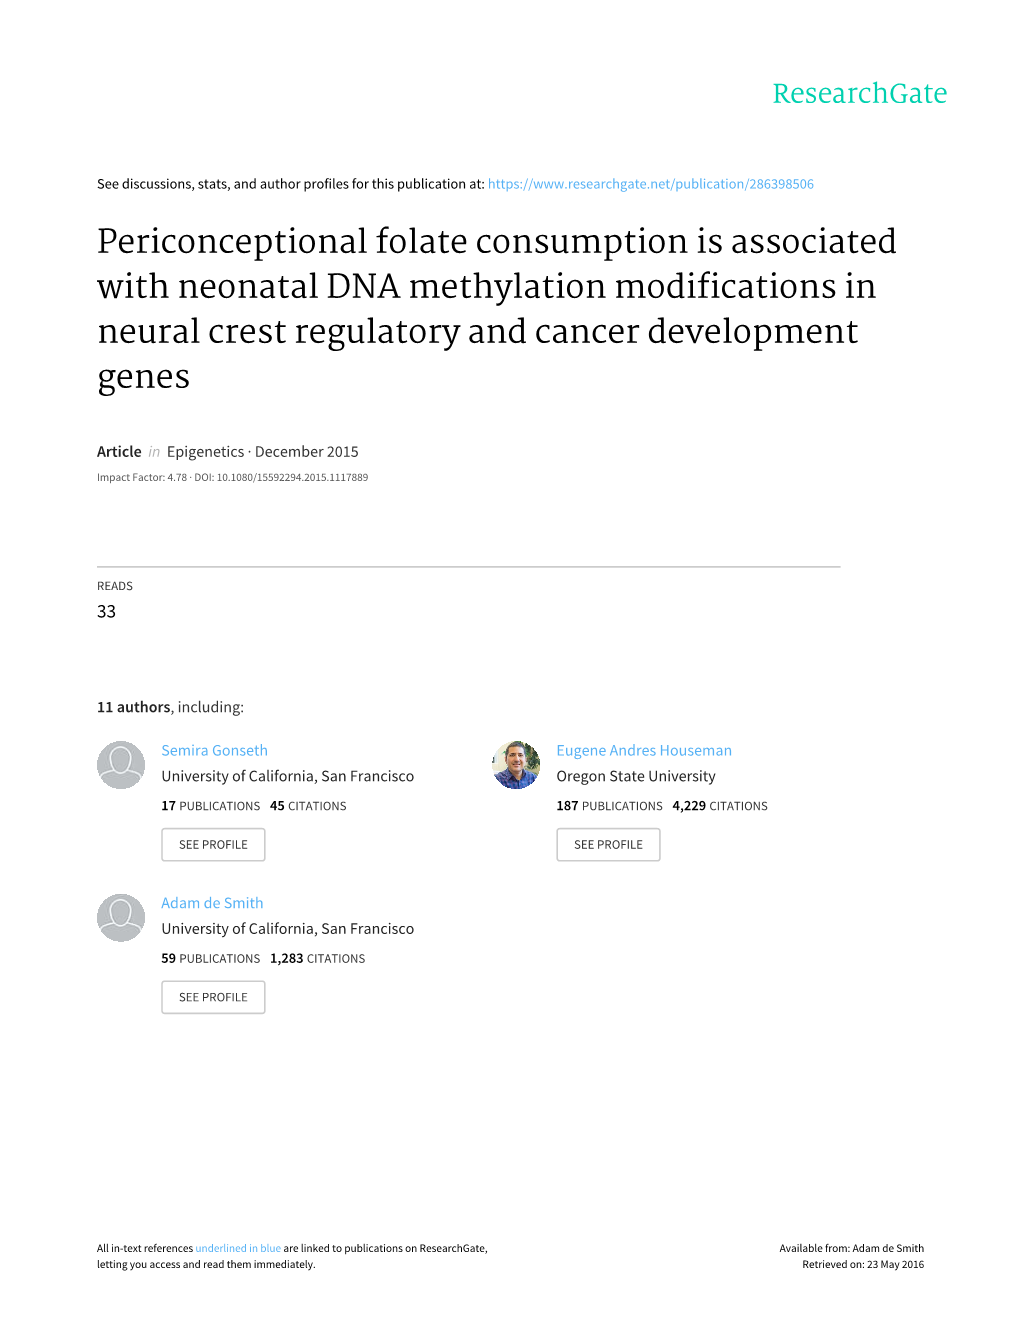 Periconceptional Folate Consumption Is Associated with Neonatal DNA Methylation Modifications in Neural Crest Regulatory and Cancer Development Genes